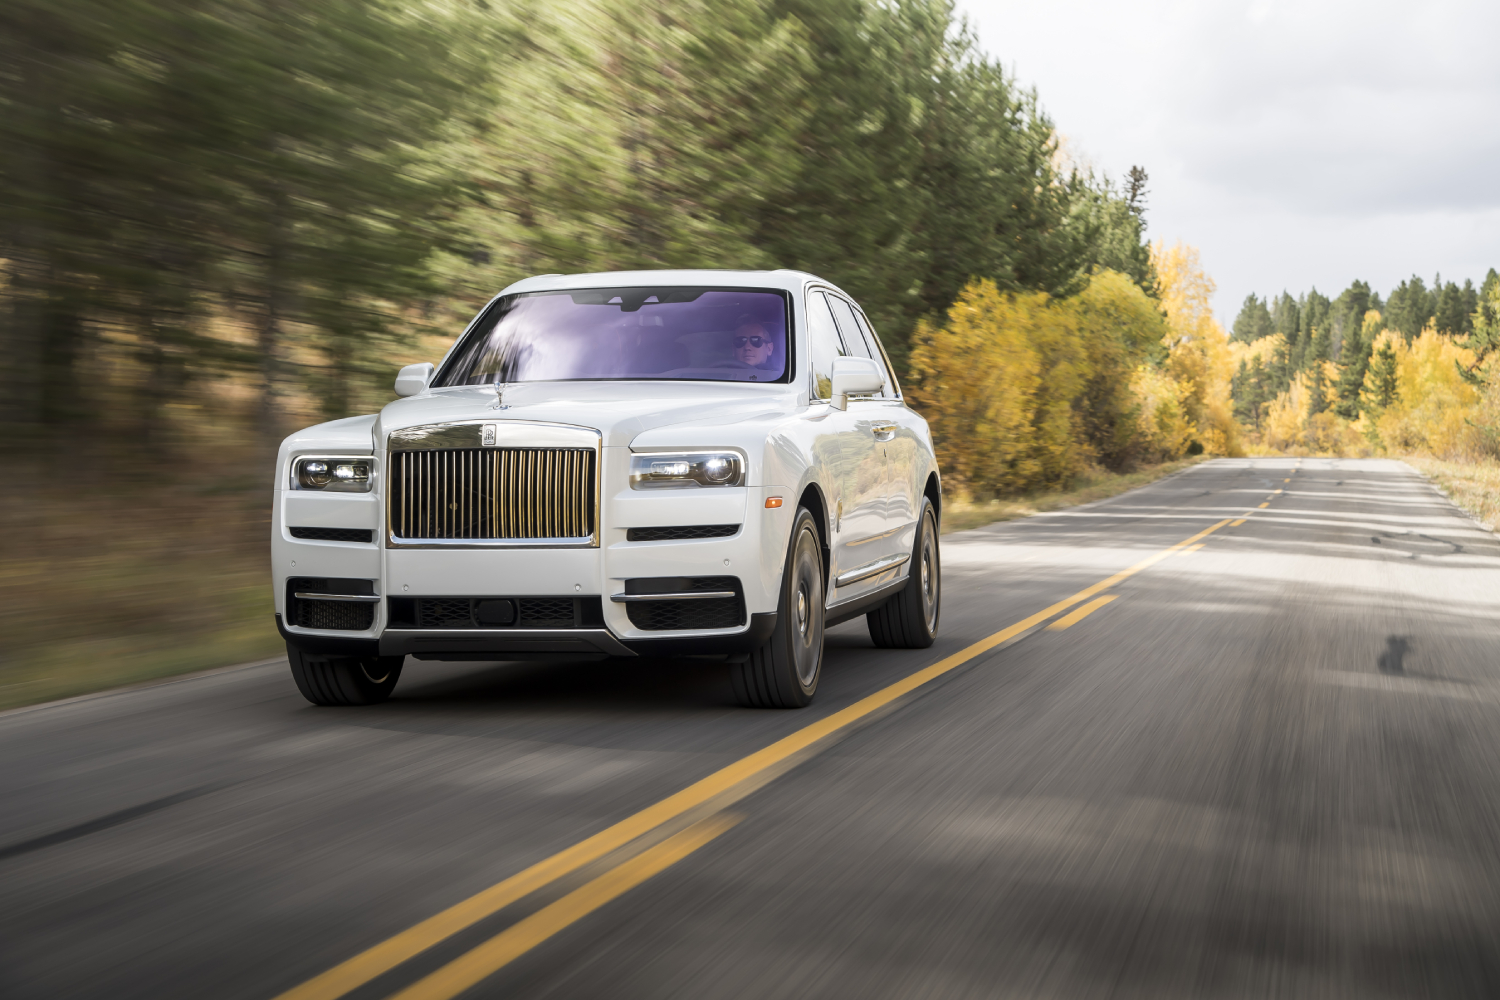 A white Rolls-Royce Cullinan driving down the road. This one is similar to the Cullinan recently added to Rick Ross' massive car collection.